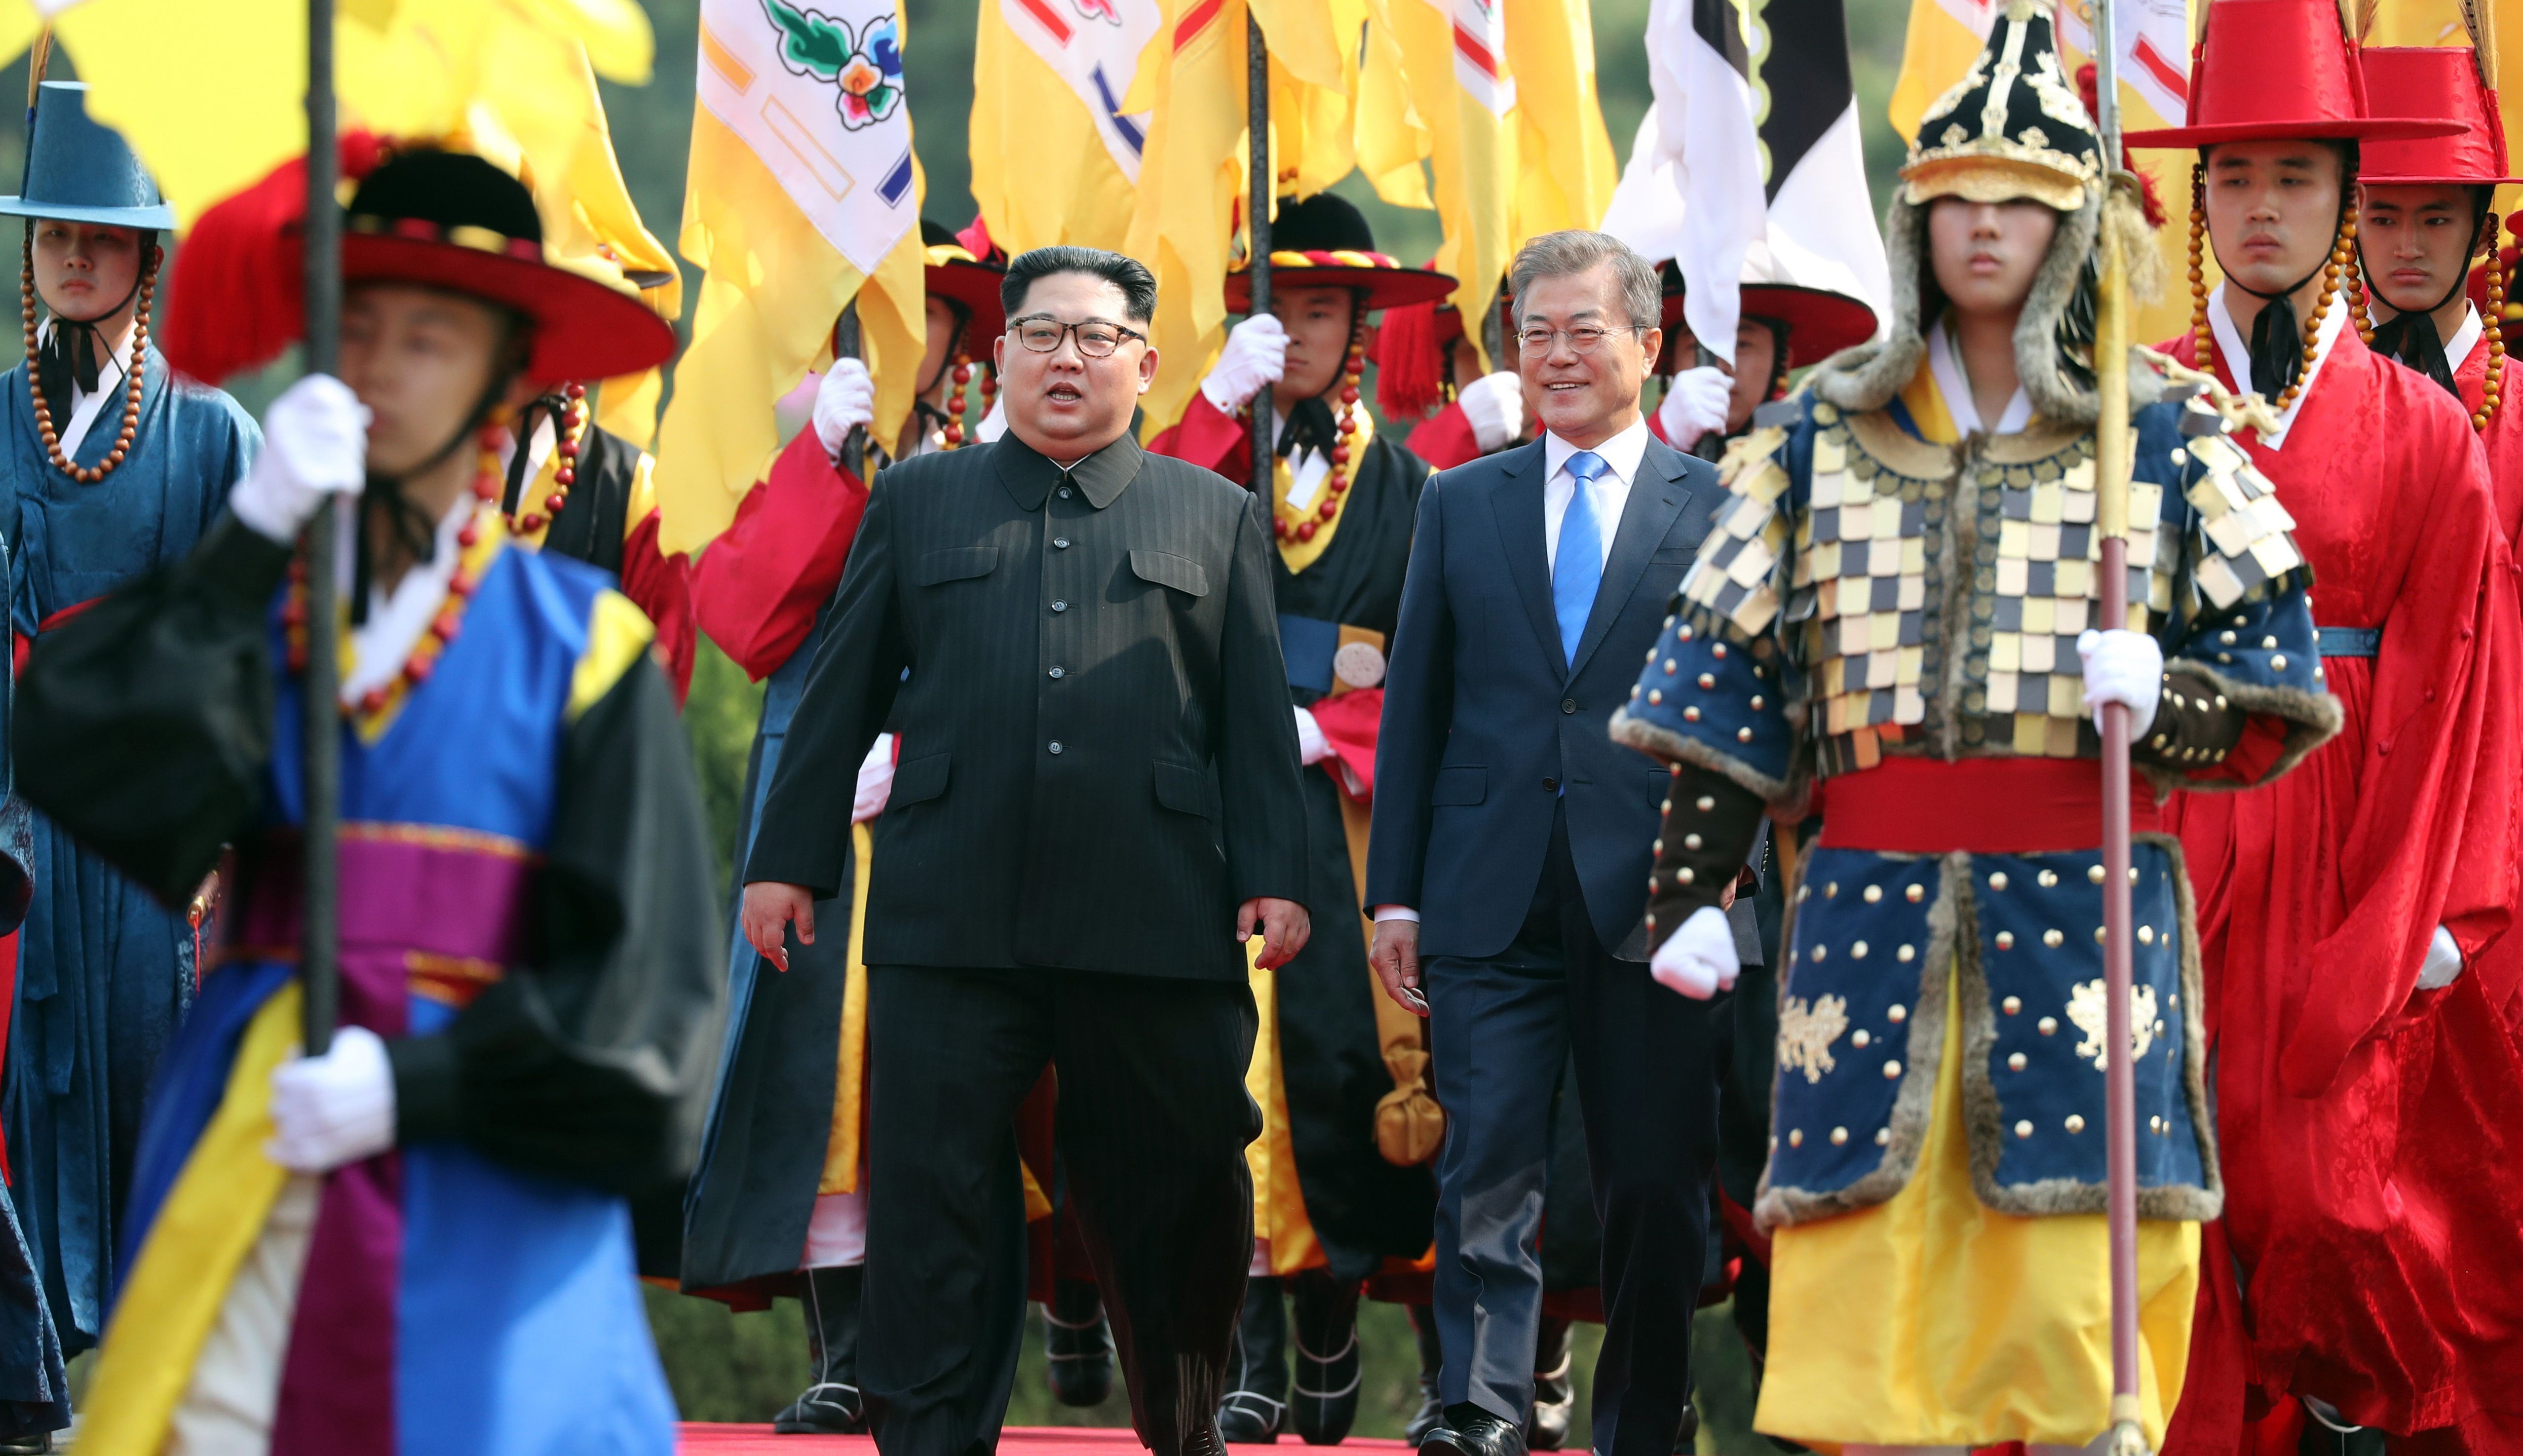 Moon Jae-in and Kim Jong-un smiled, embraced and pledged an end to conflict in Korea. But the success of their summit may not truly become clear until Kim sits down with the American leader